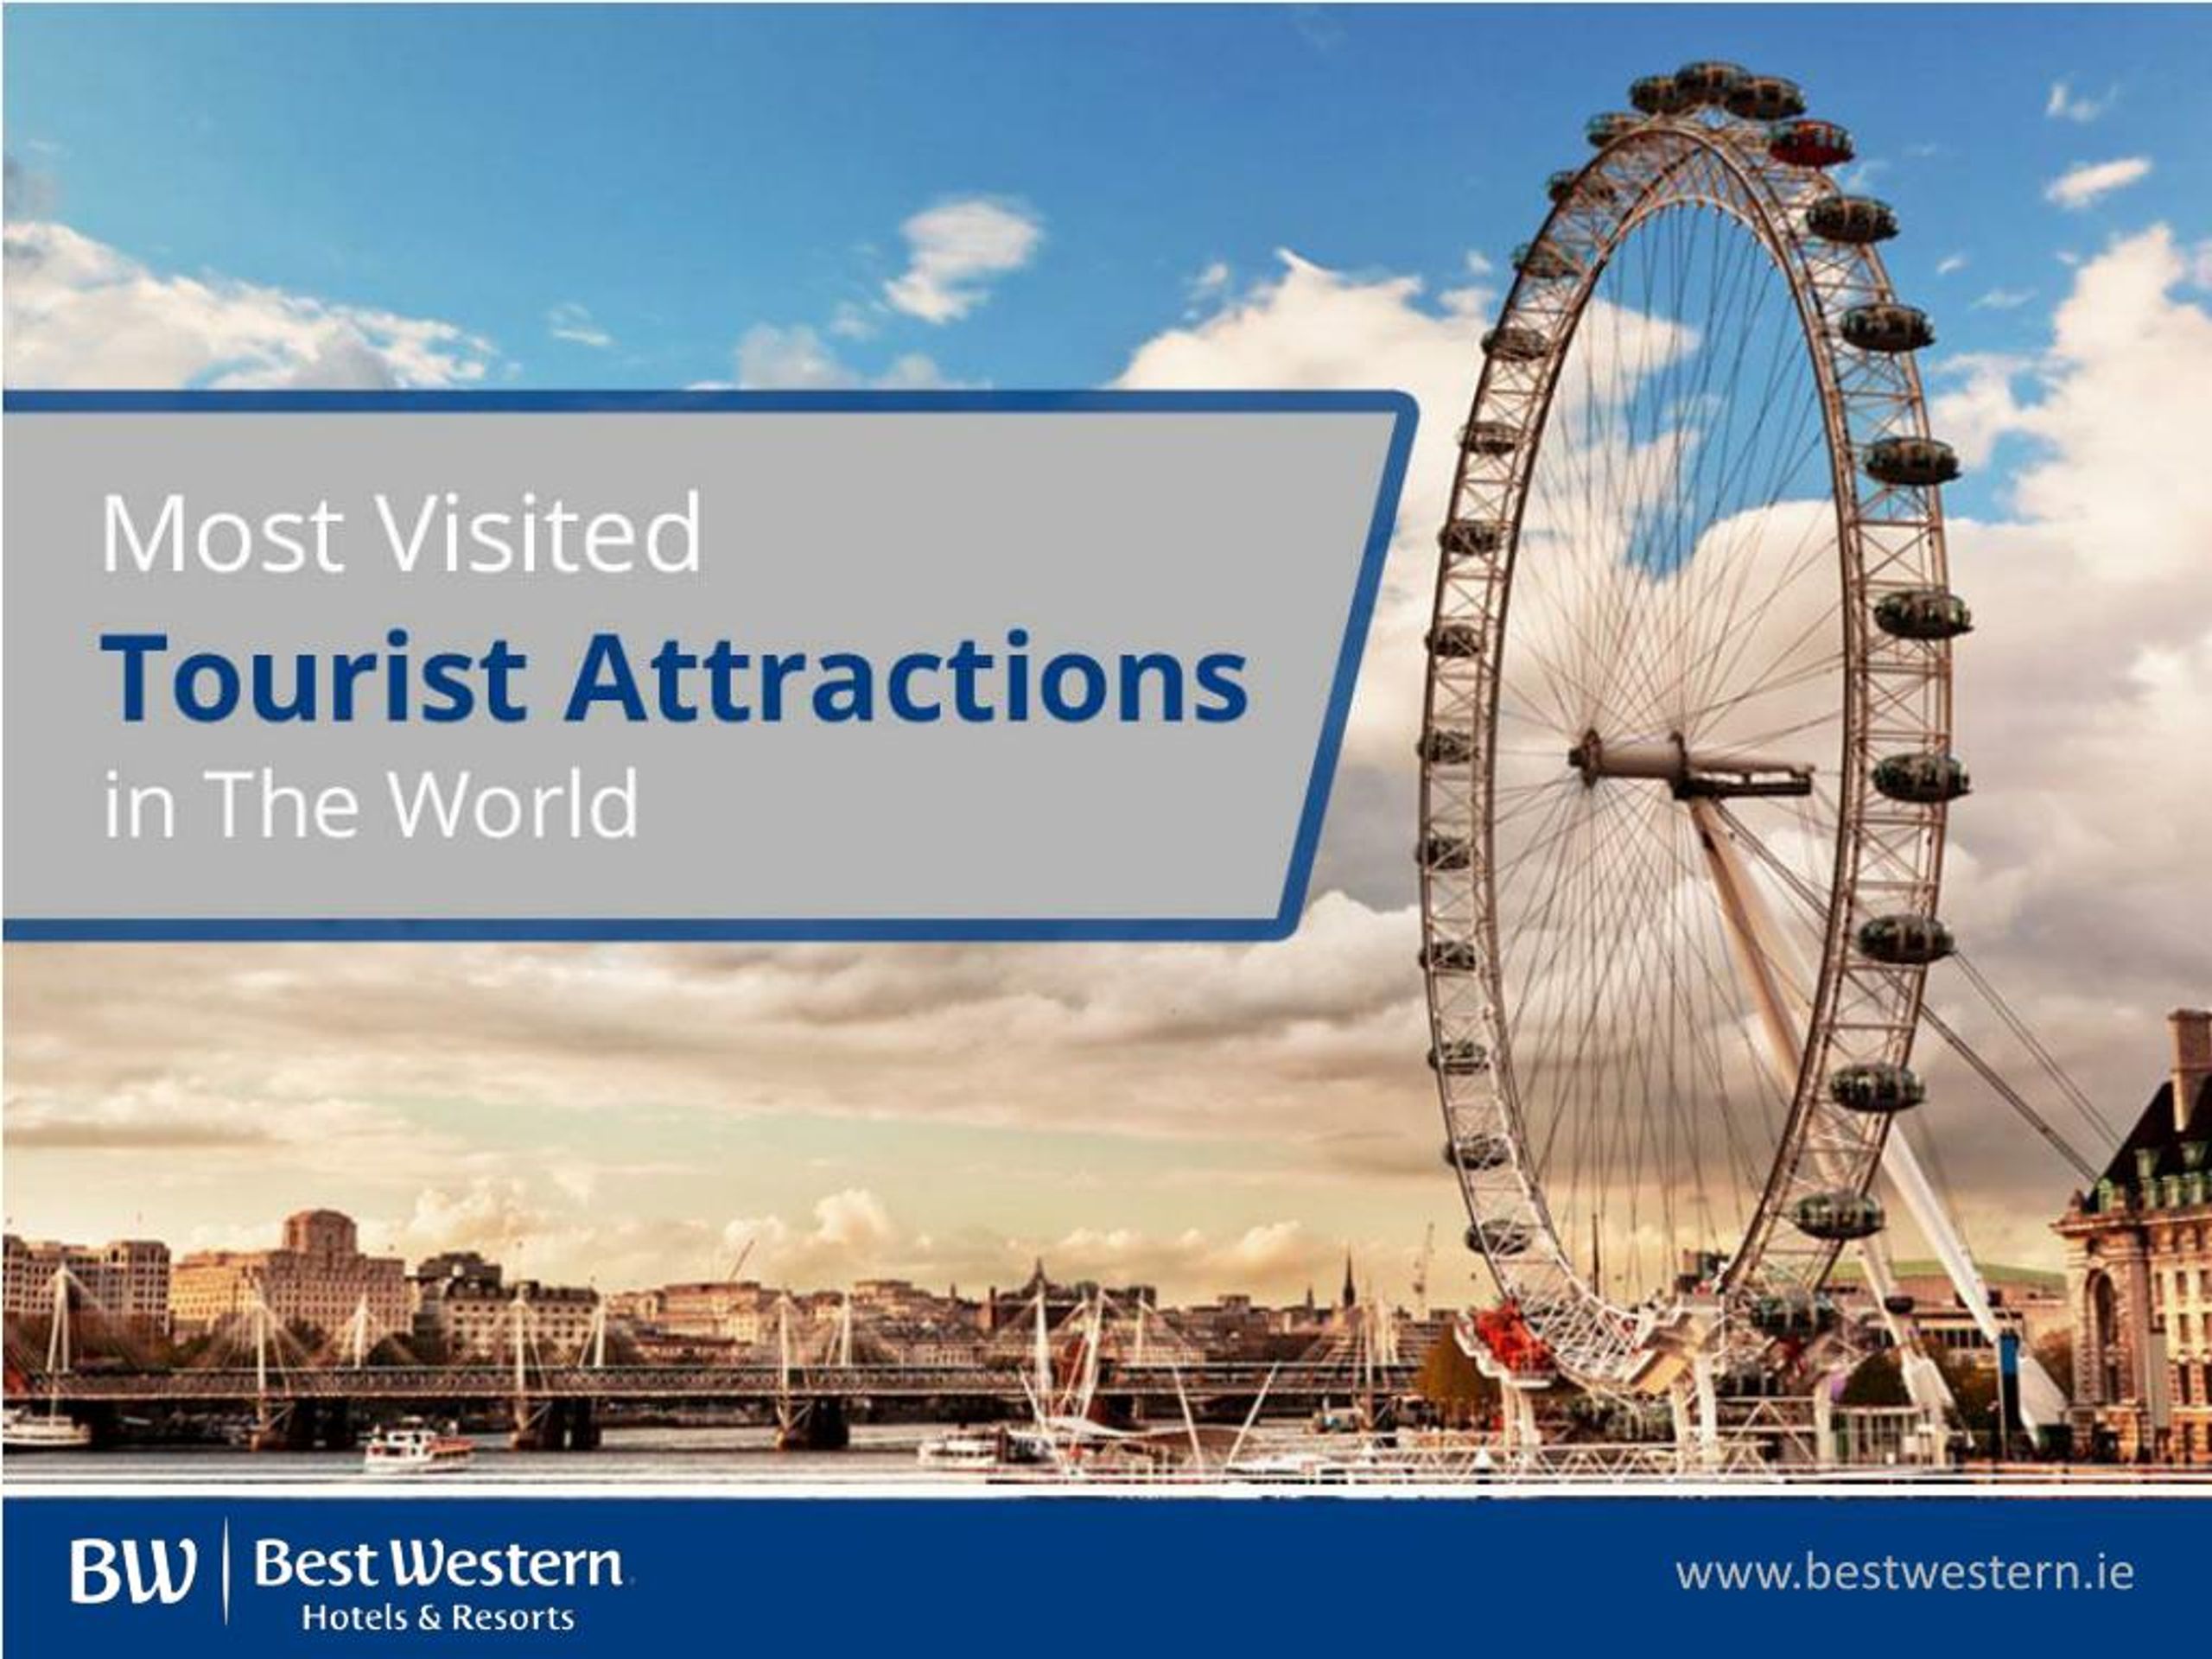 PPT - List of Most Visited Tourist Attractions in The World PowerPoint ...